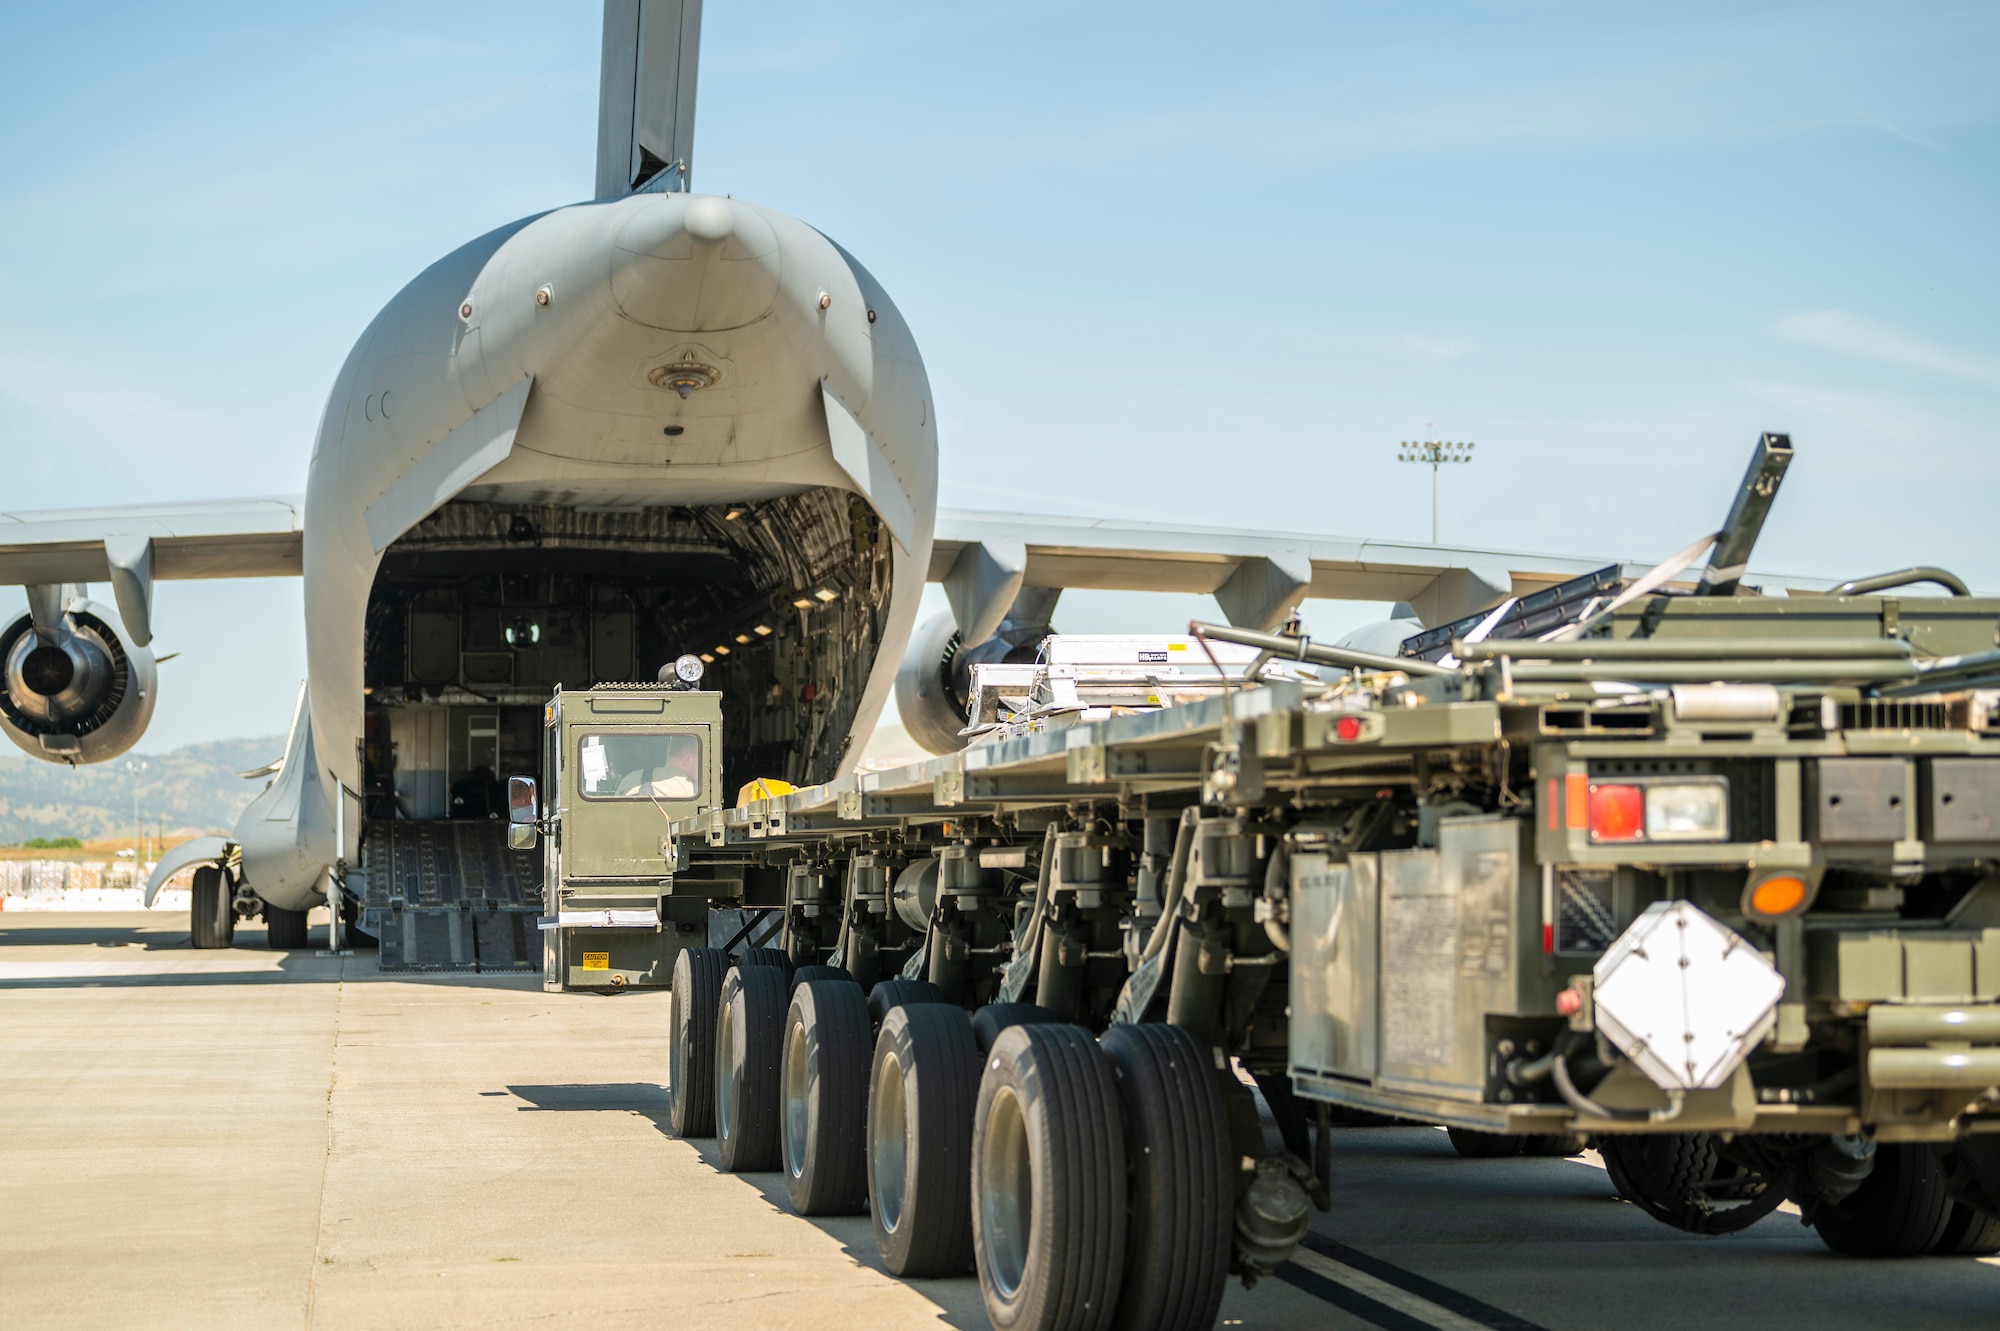 A large military vehicle that is used to load pallets on to large military aircraft, drives towards  a C-17 Globemaster III, a large Air Force aircraft.